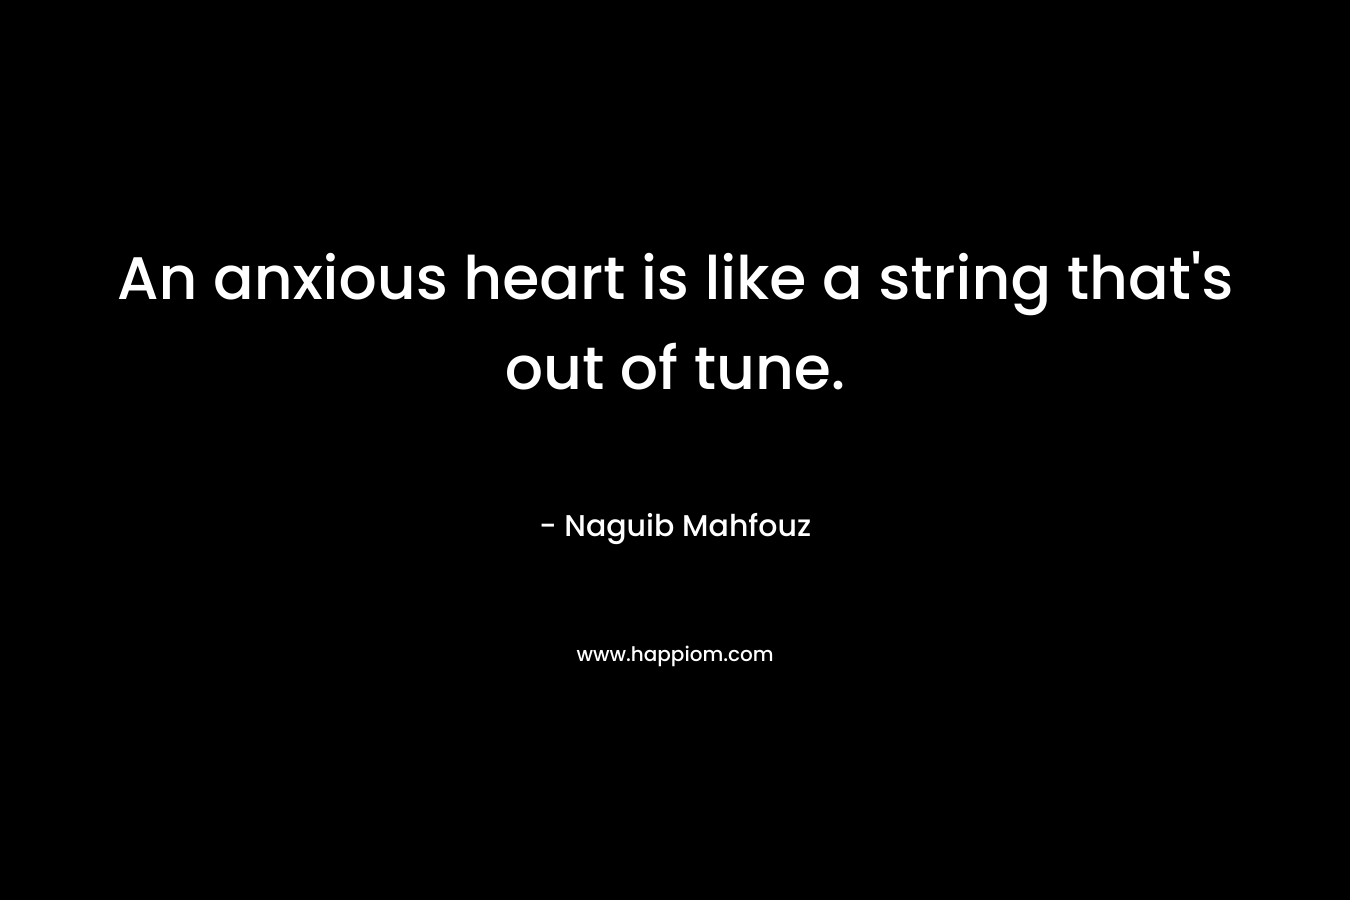 An anxious heart is like a string that’s out of tune. – Naguib Mahfouz